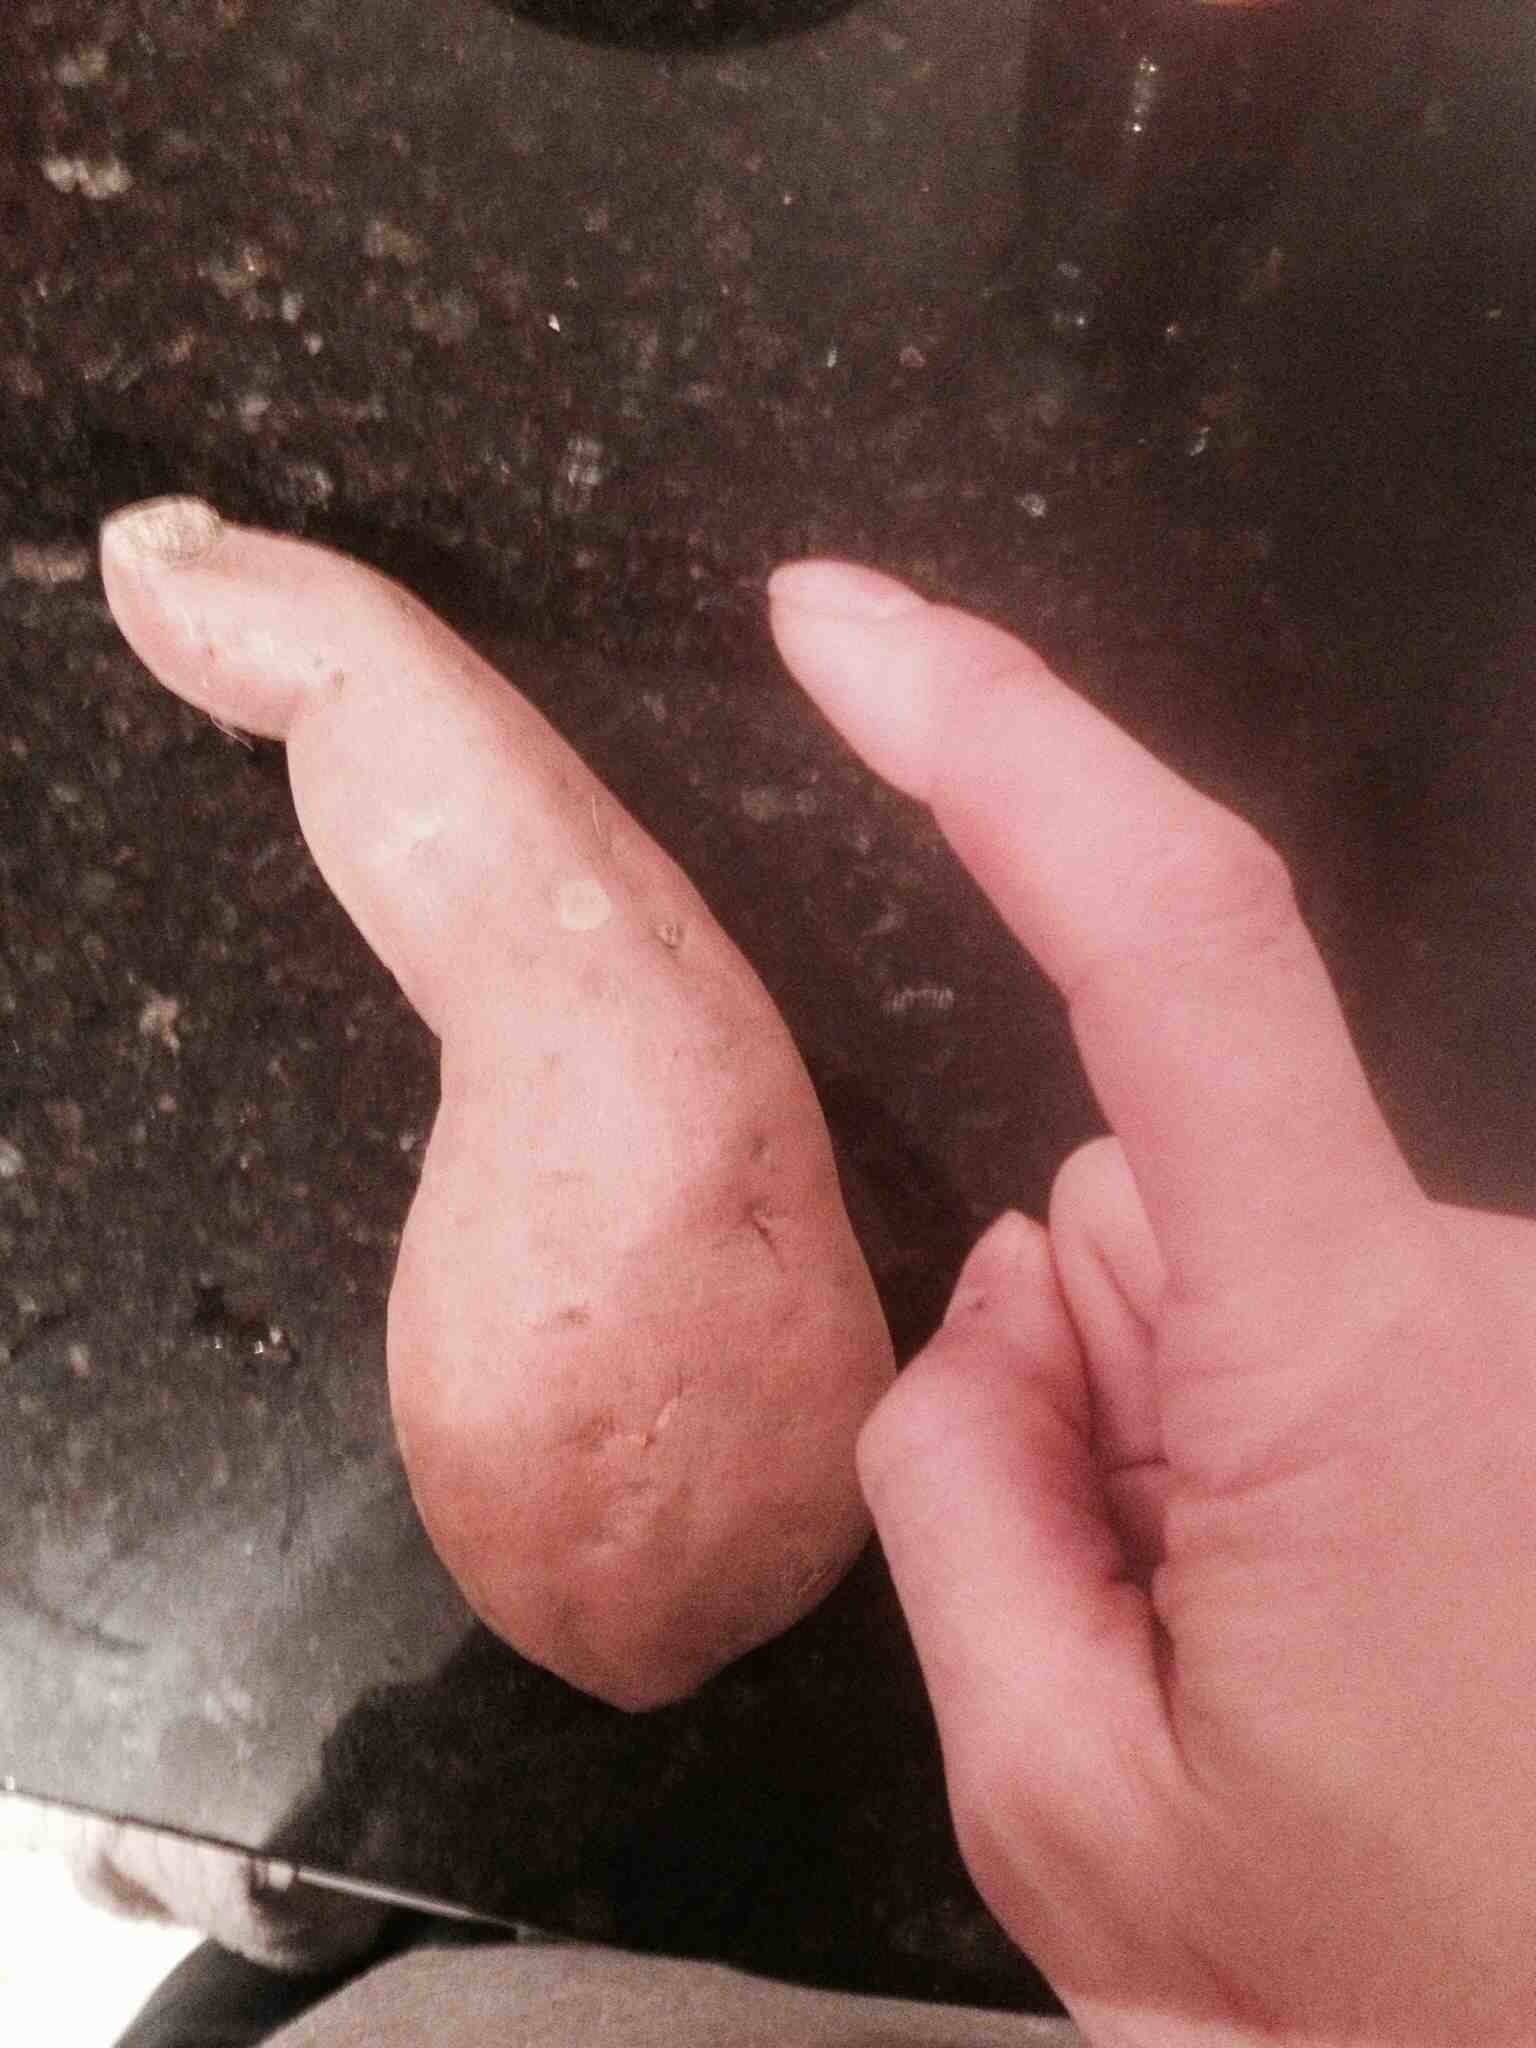 I don't know if I could eat this sweet potato.